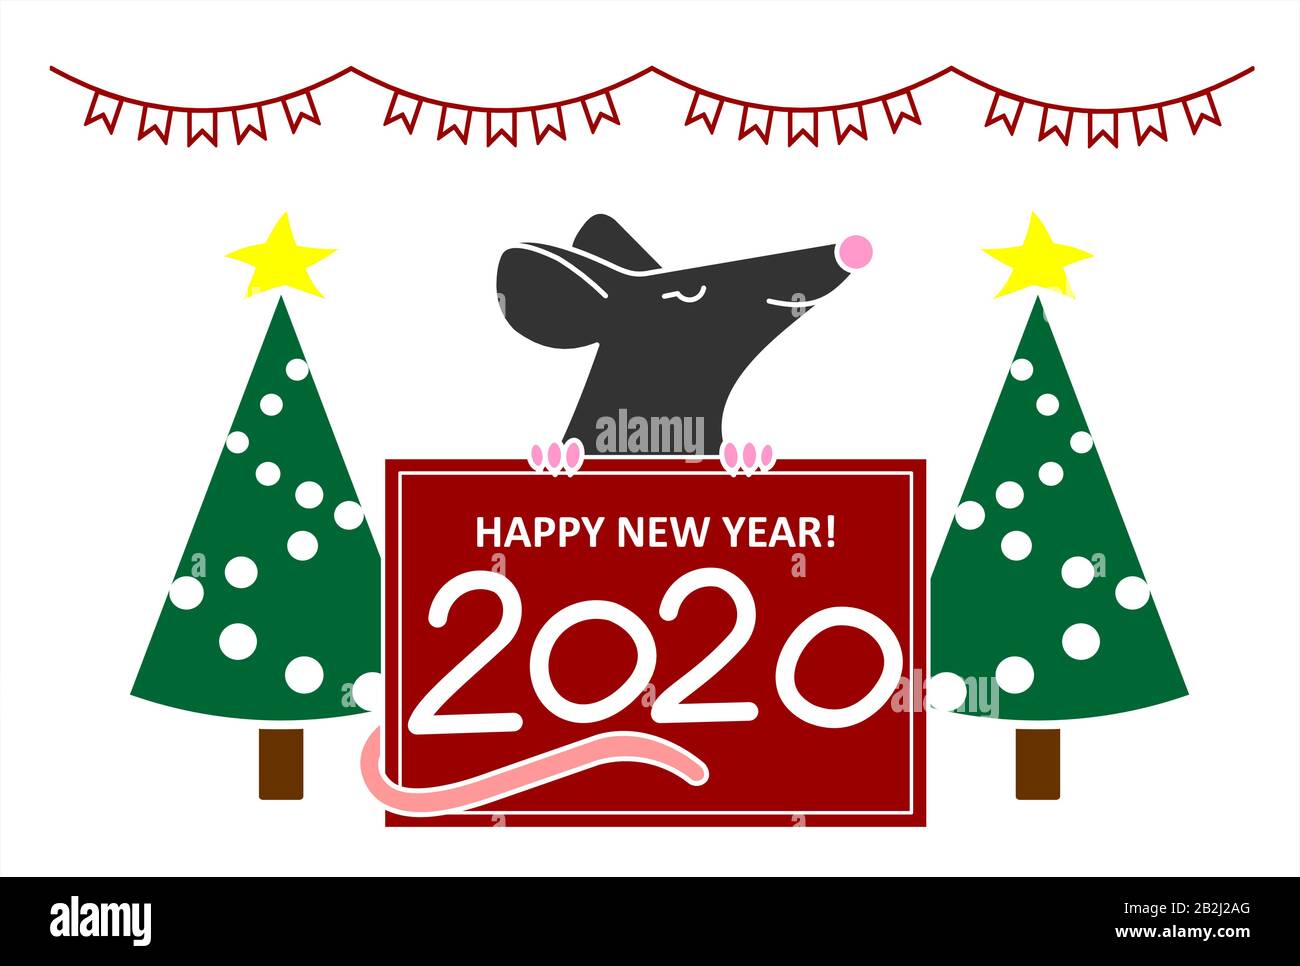 A Rat Or Mouse Holds A New Year, Christmas Poster With Congratulations, With Numbers 2020. A Cute Smiling Rat Or Mouse On A White Background, Next To Stock Vector